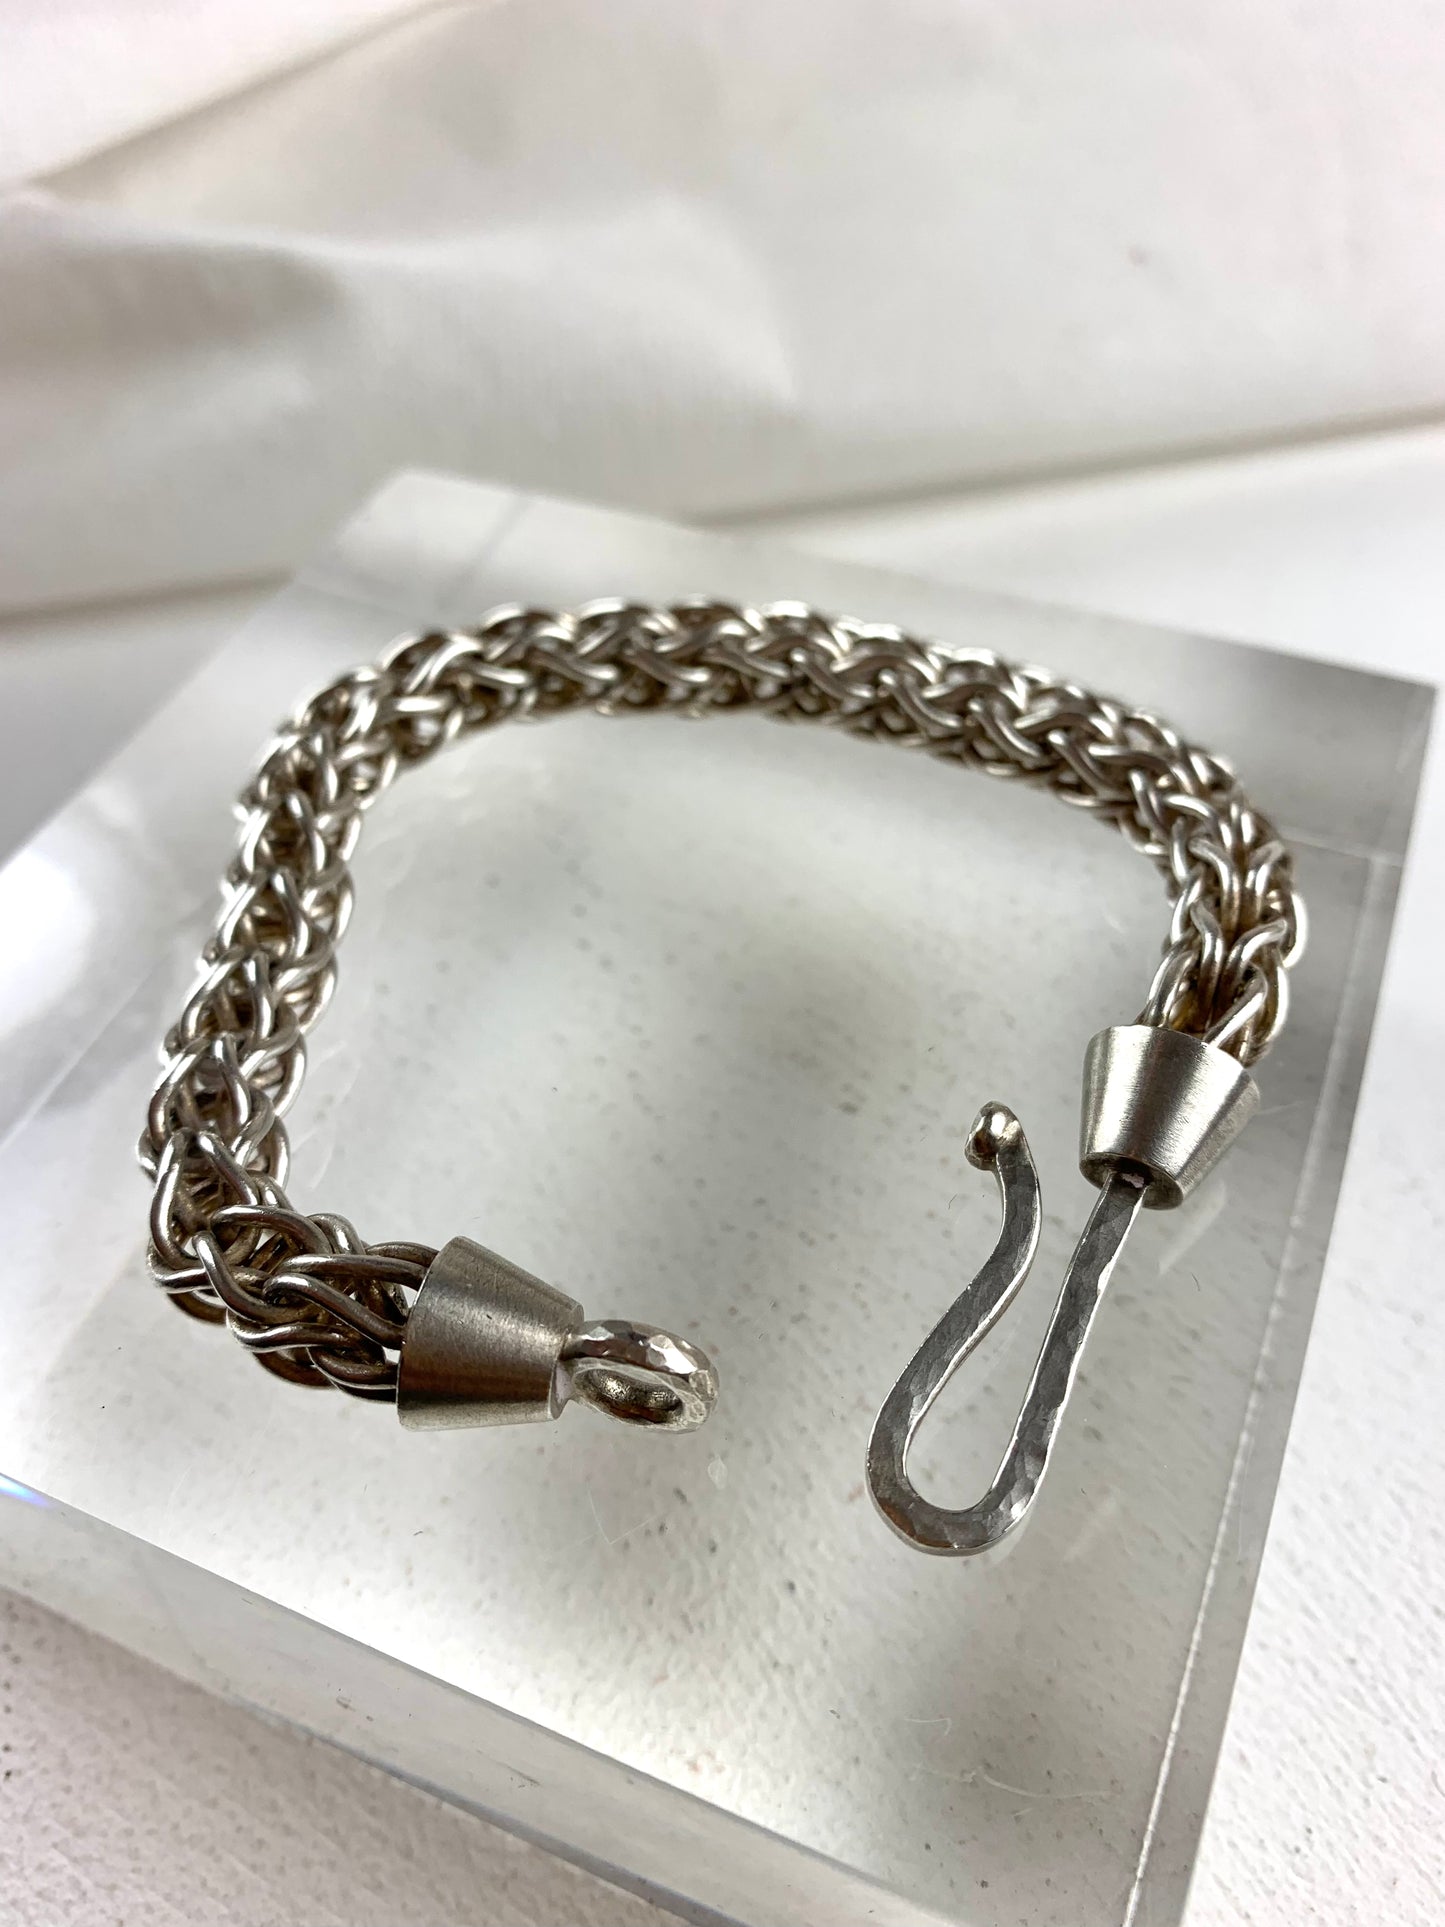 Betts, Malcolm - Silver Hand Woven Bracelet with Diamond Clasp